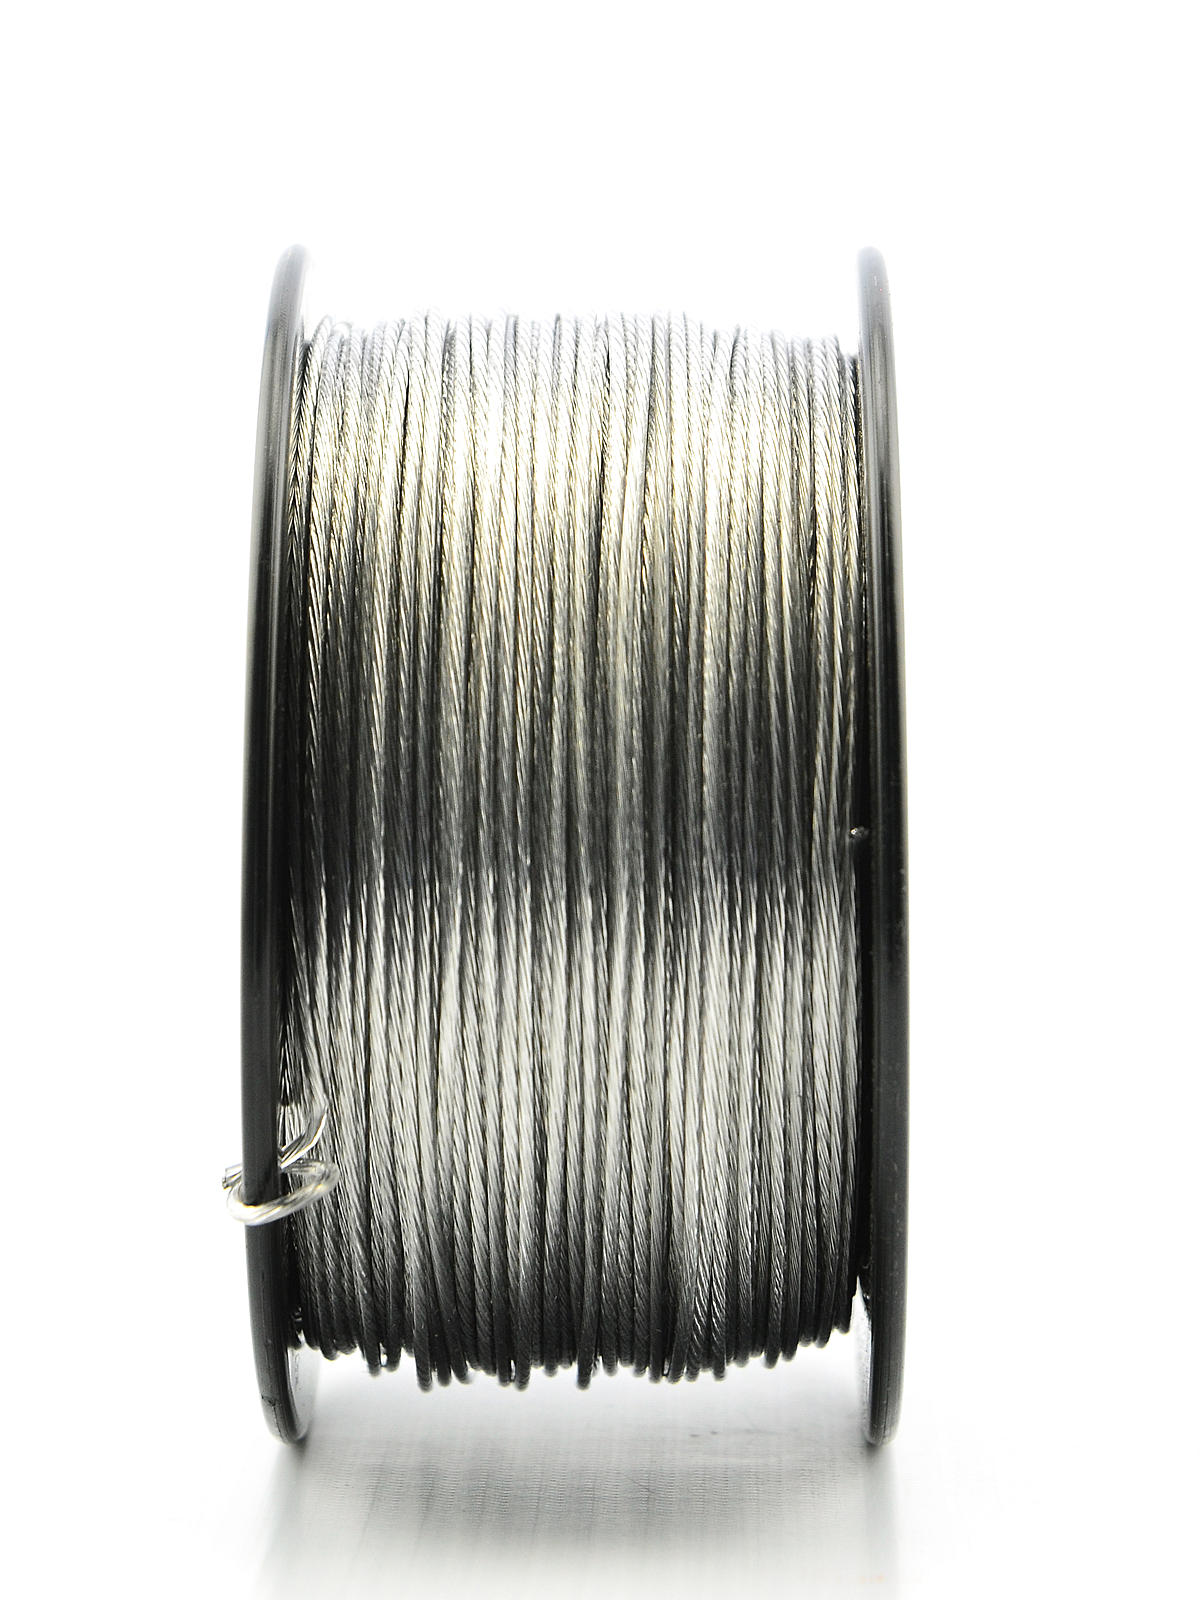 Braided Picture Wire 35 Lbs. 24 Strand 5 Lb. Spool